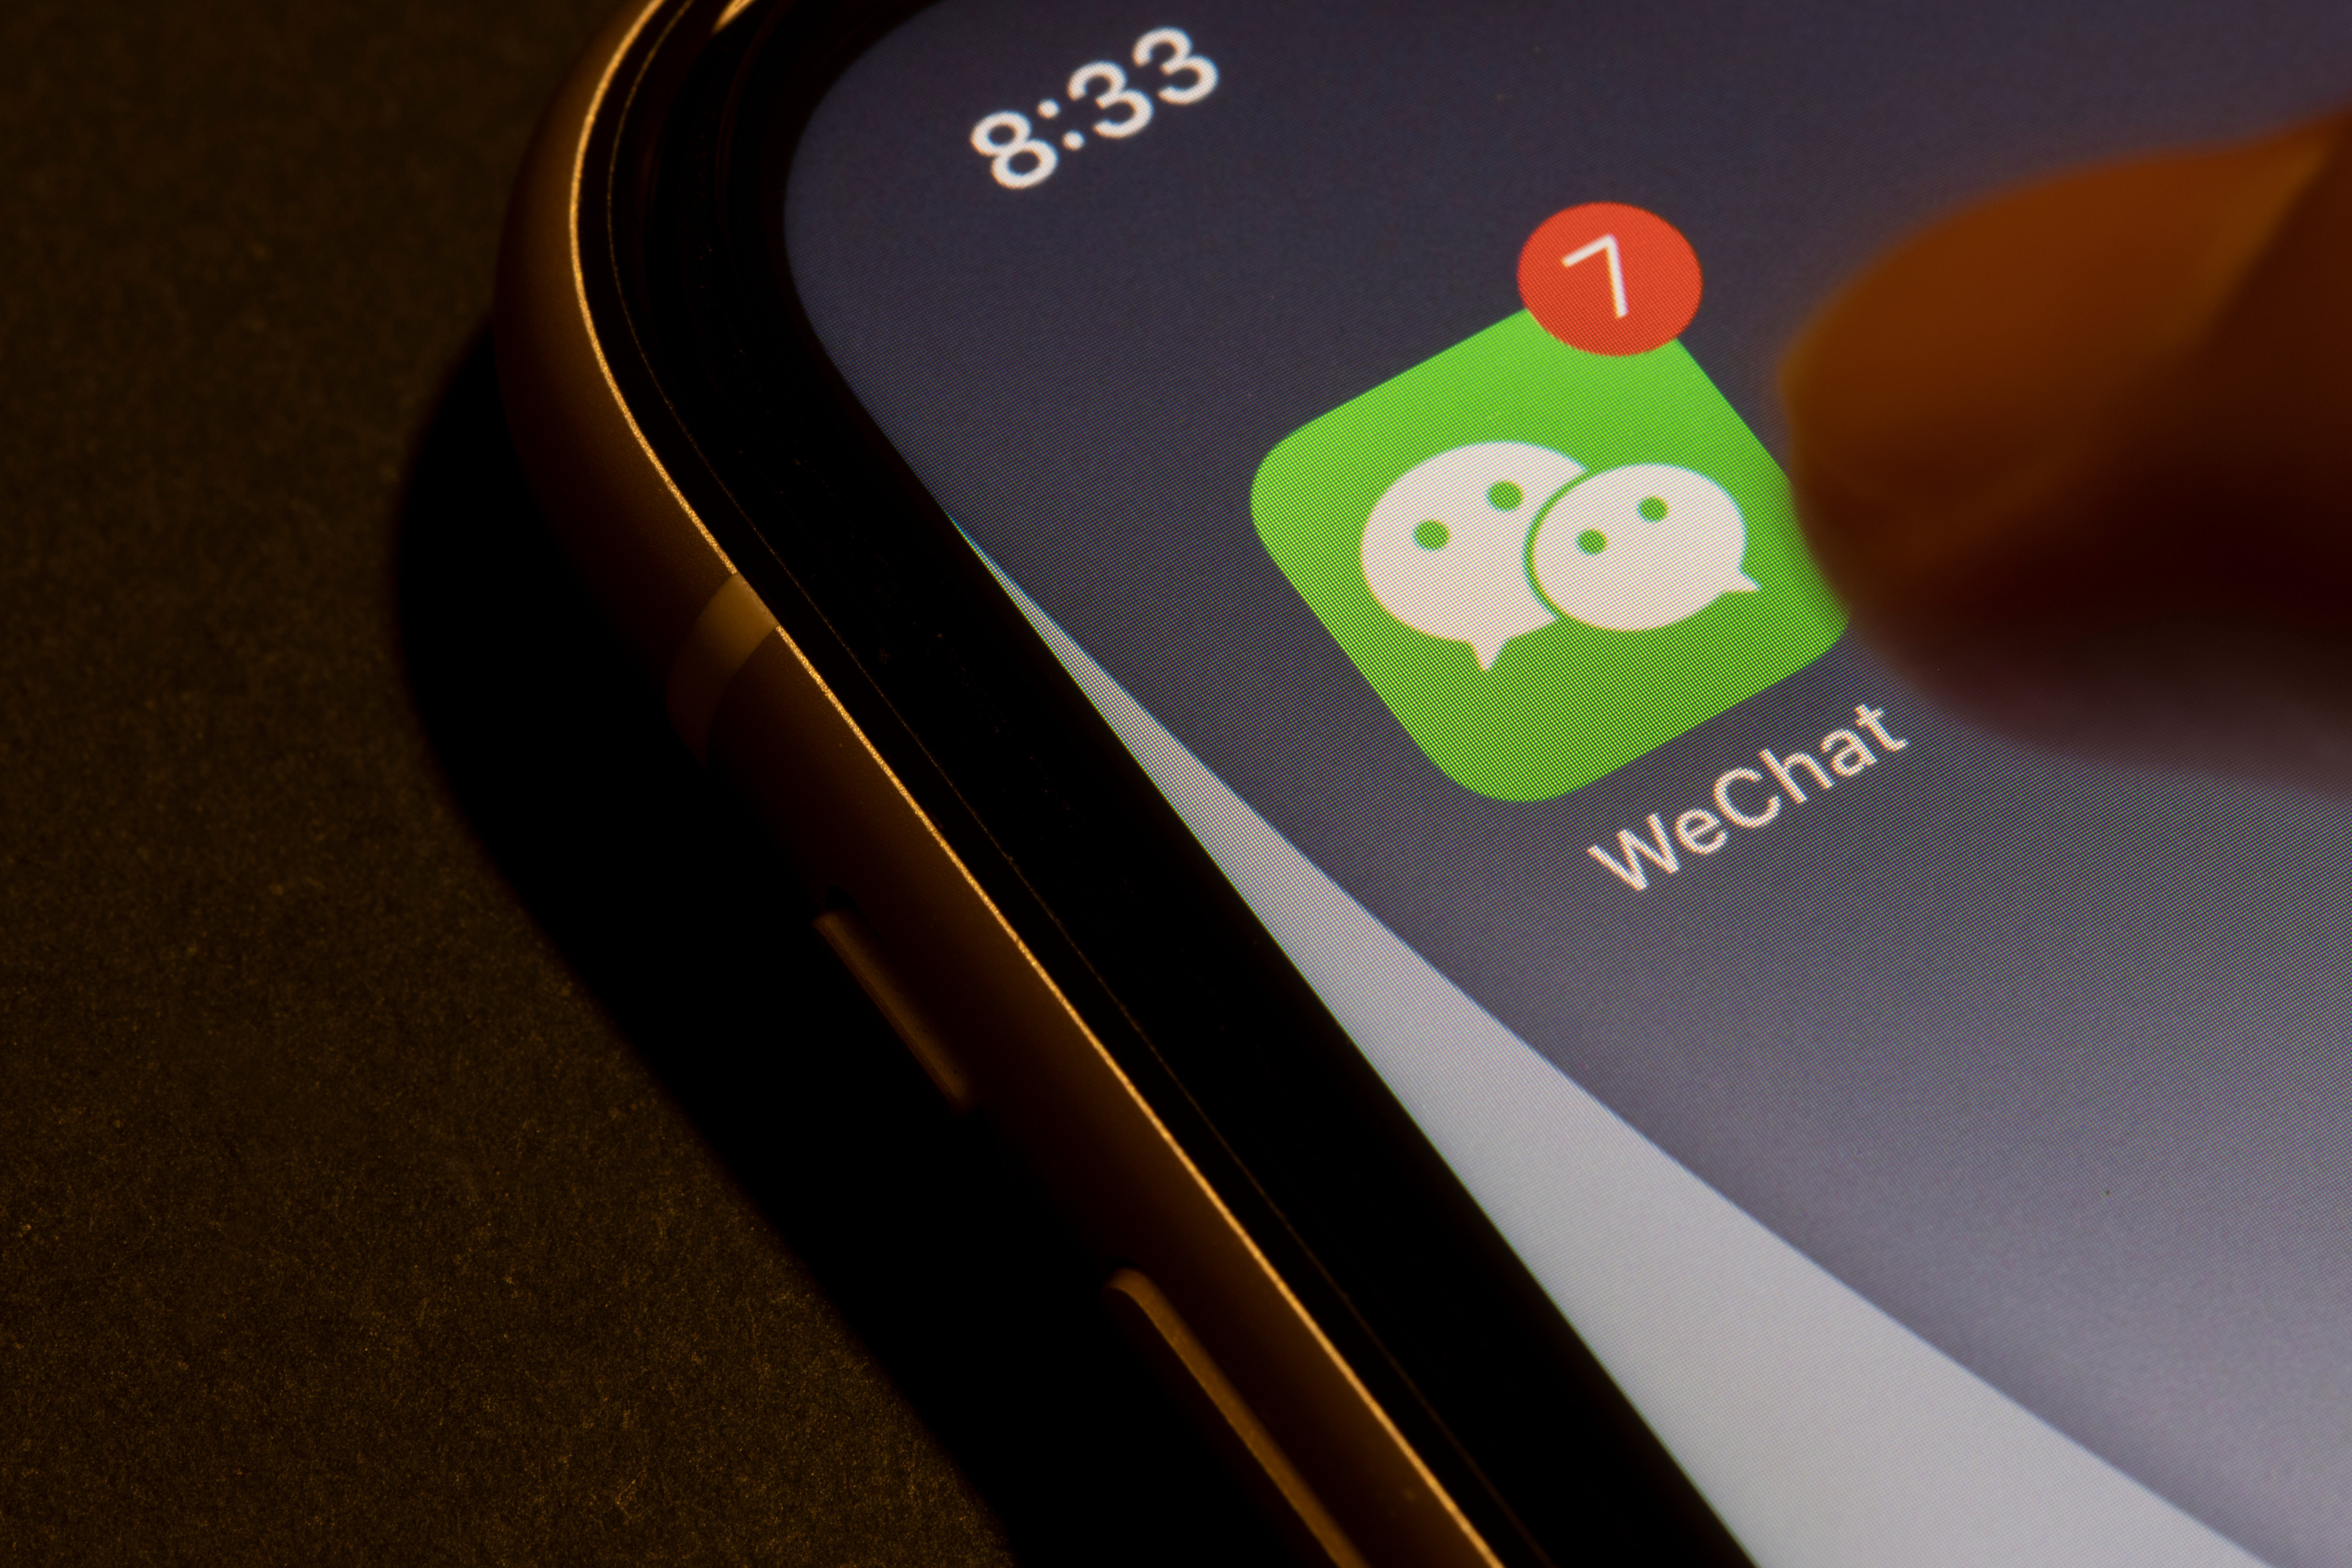 Tencent’s WeChat is a Chinese multi-purpose messaging, social media and mobile payment app. Photo: Shutterstock 